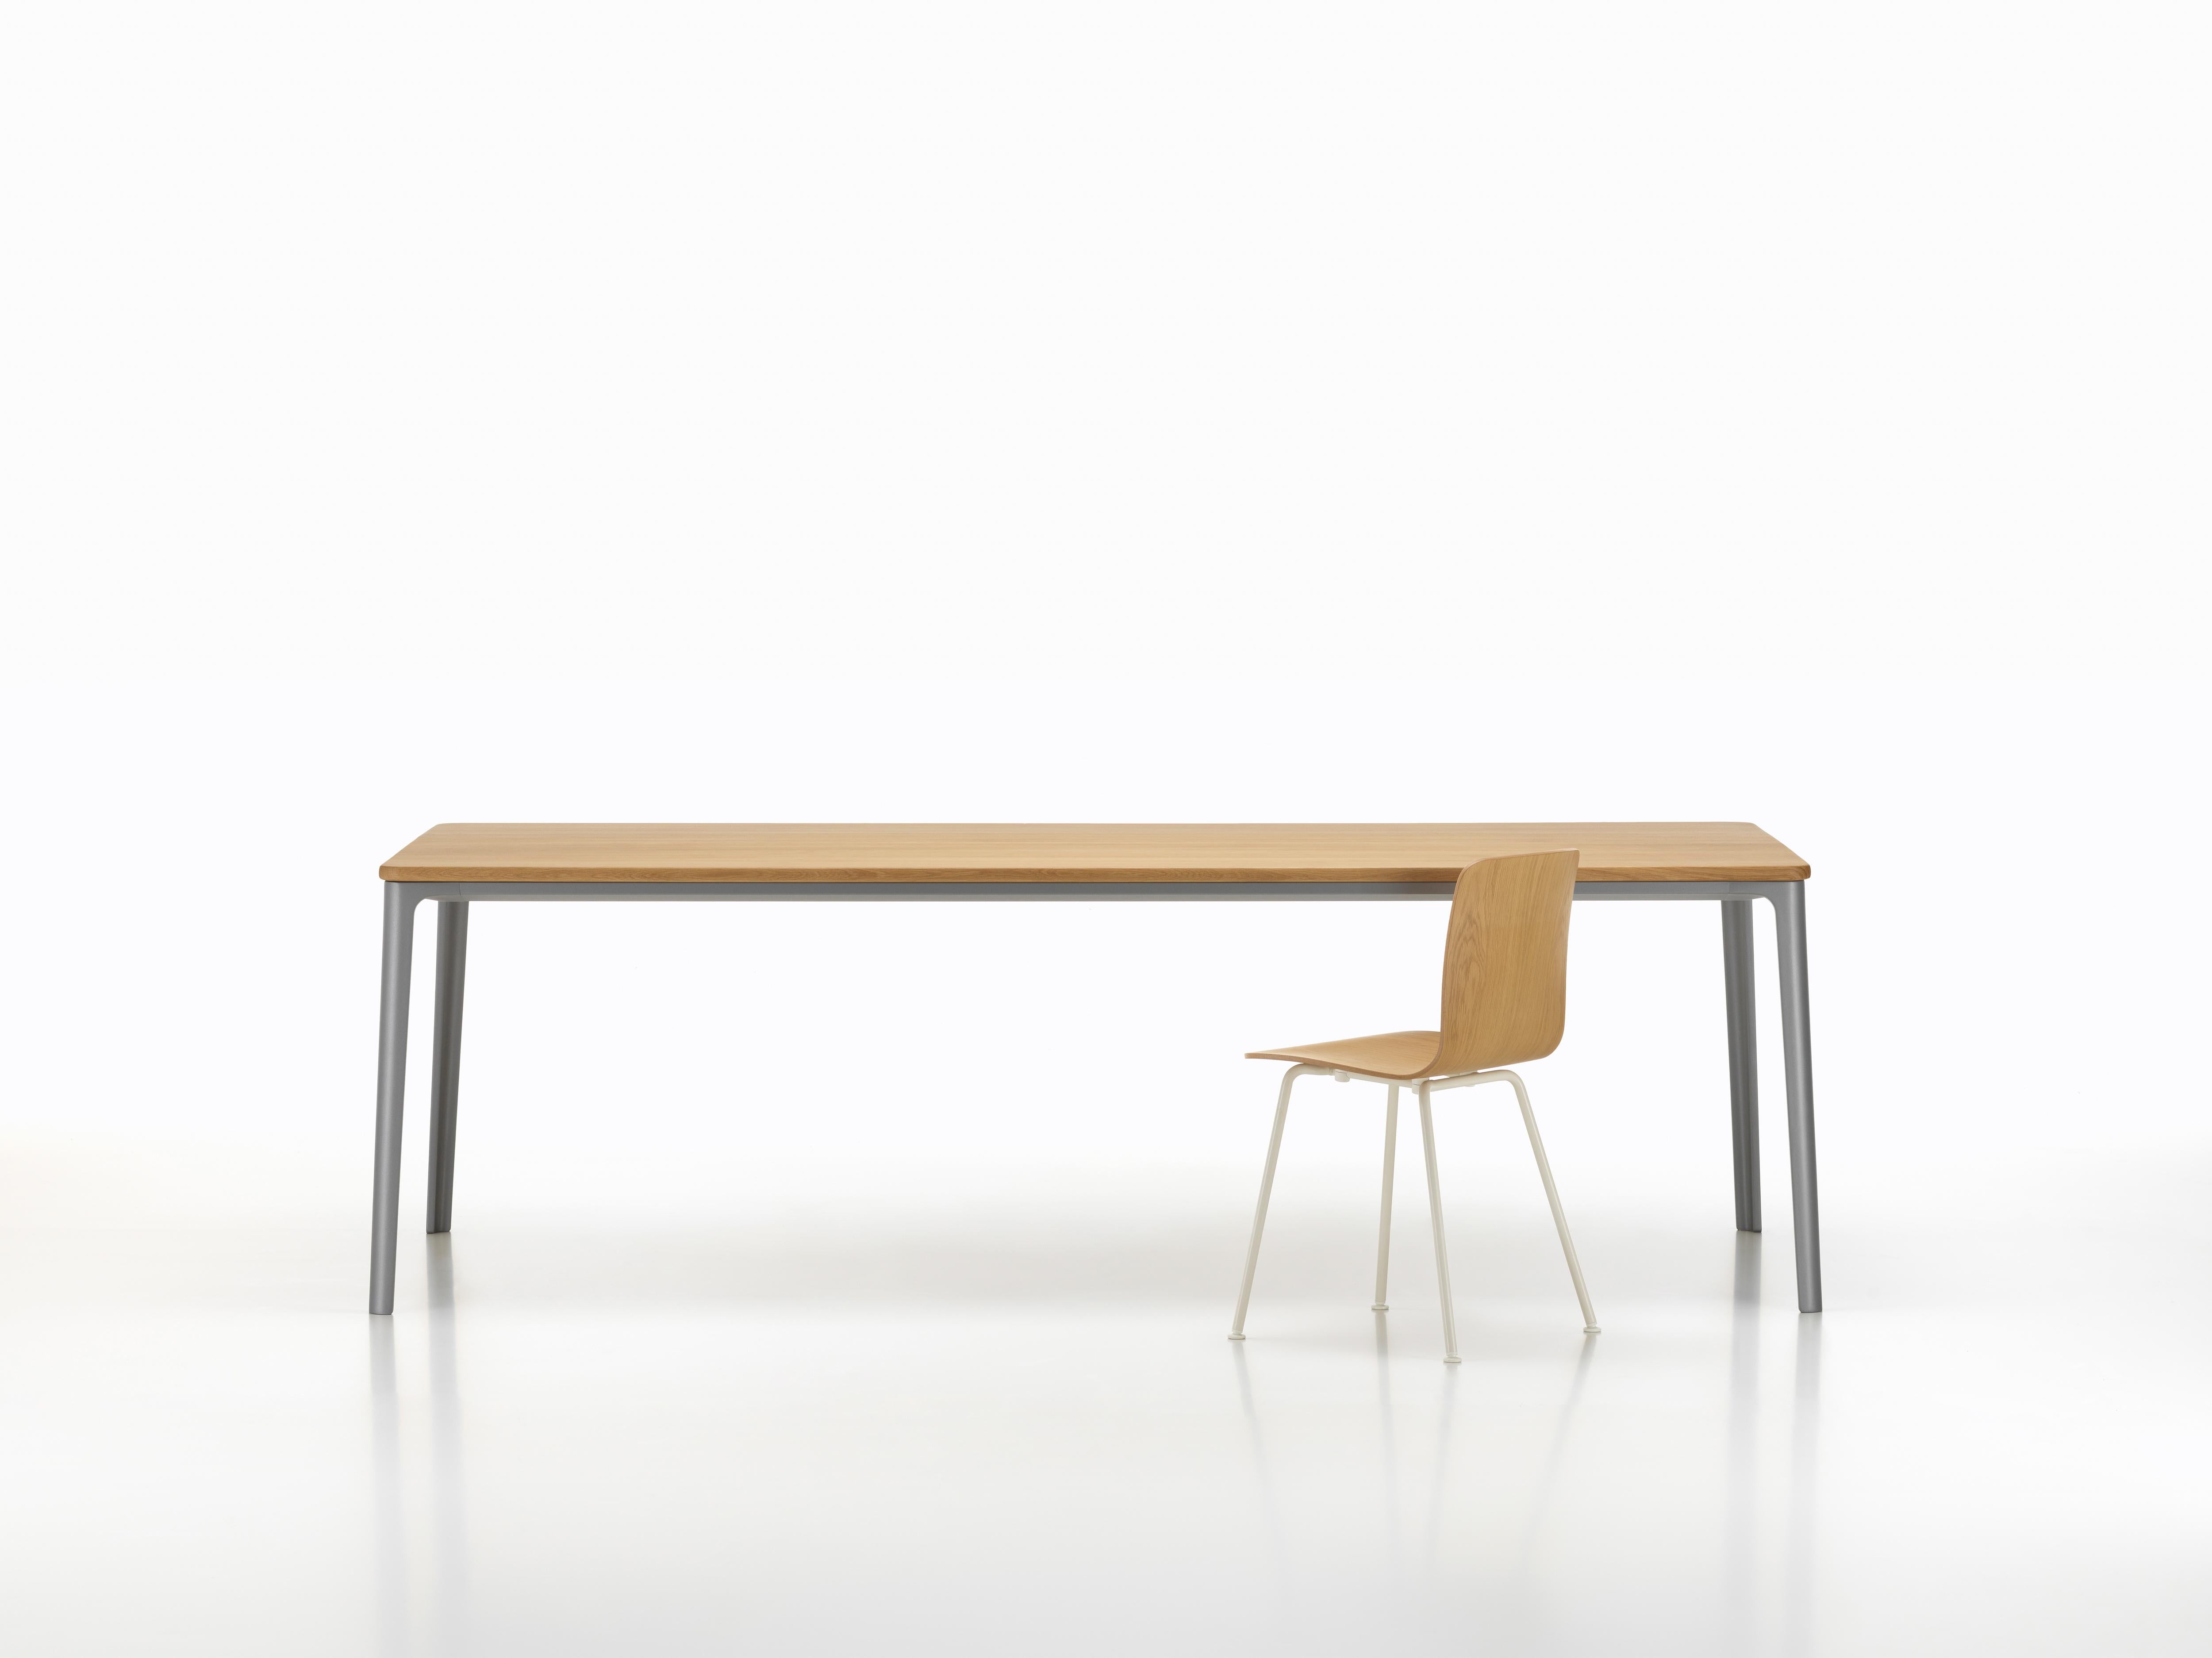 Vitra Plate Dining Table in Natural Oak and Earth Grey Base by Jasper Morrison (Schweizerisch) im Angebot